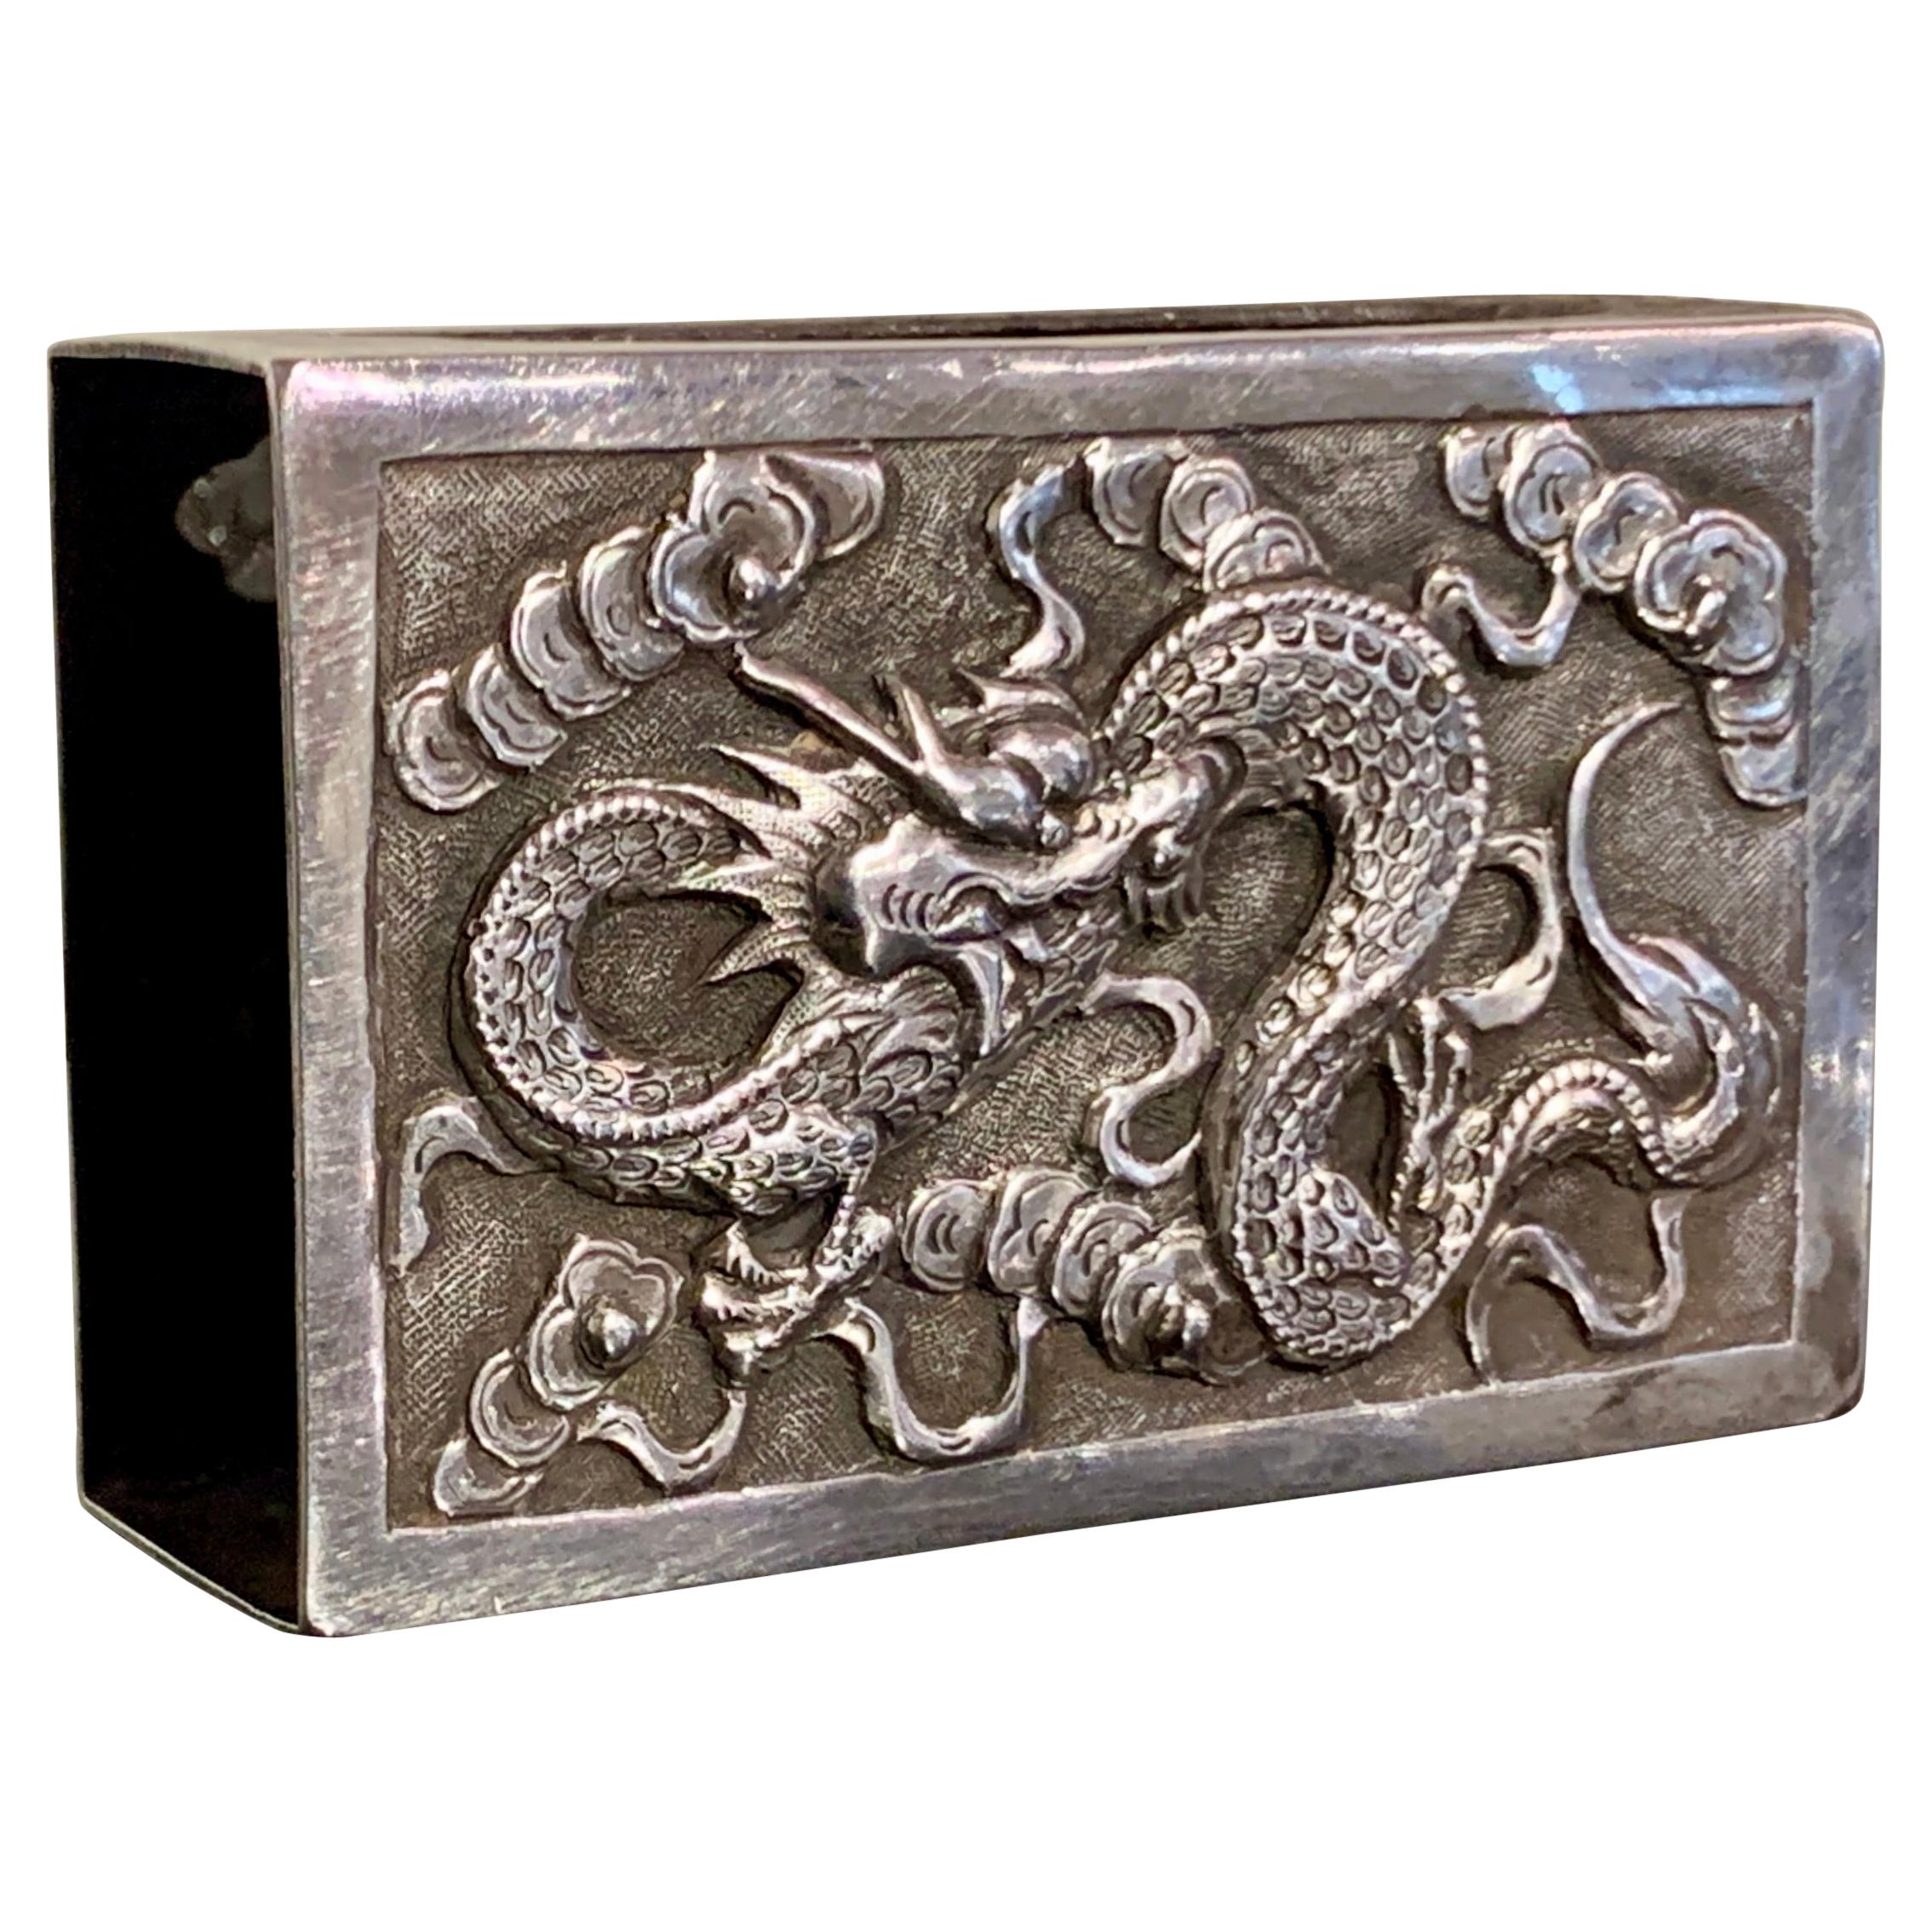 Chinese Export Silver Matchbox Cover by Hone Wo, Early 20th Century